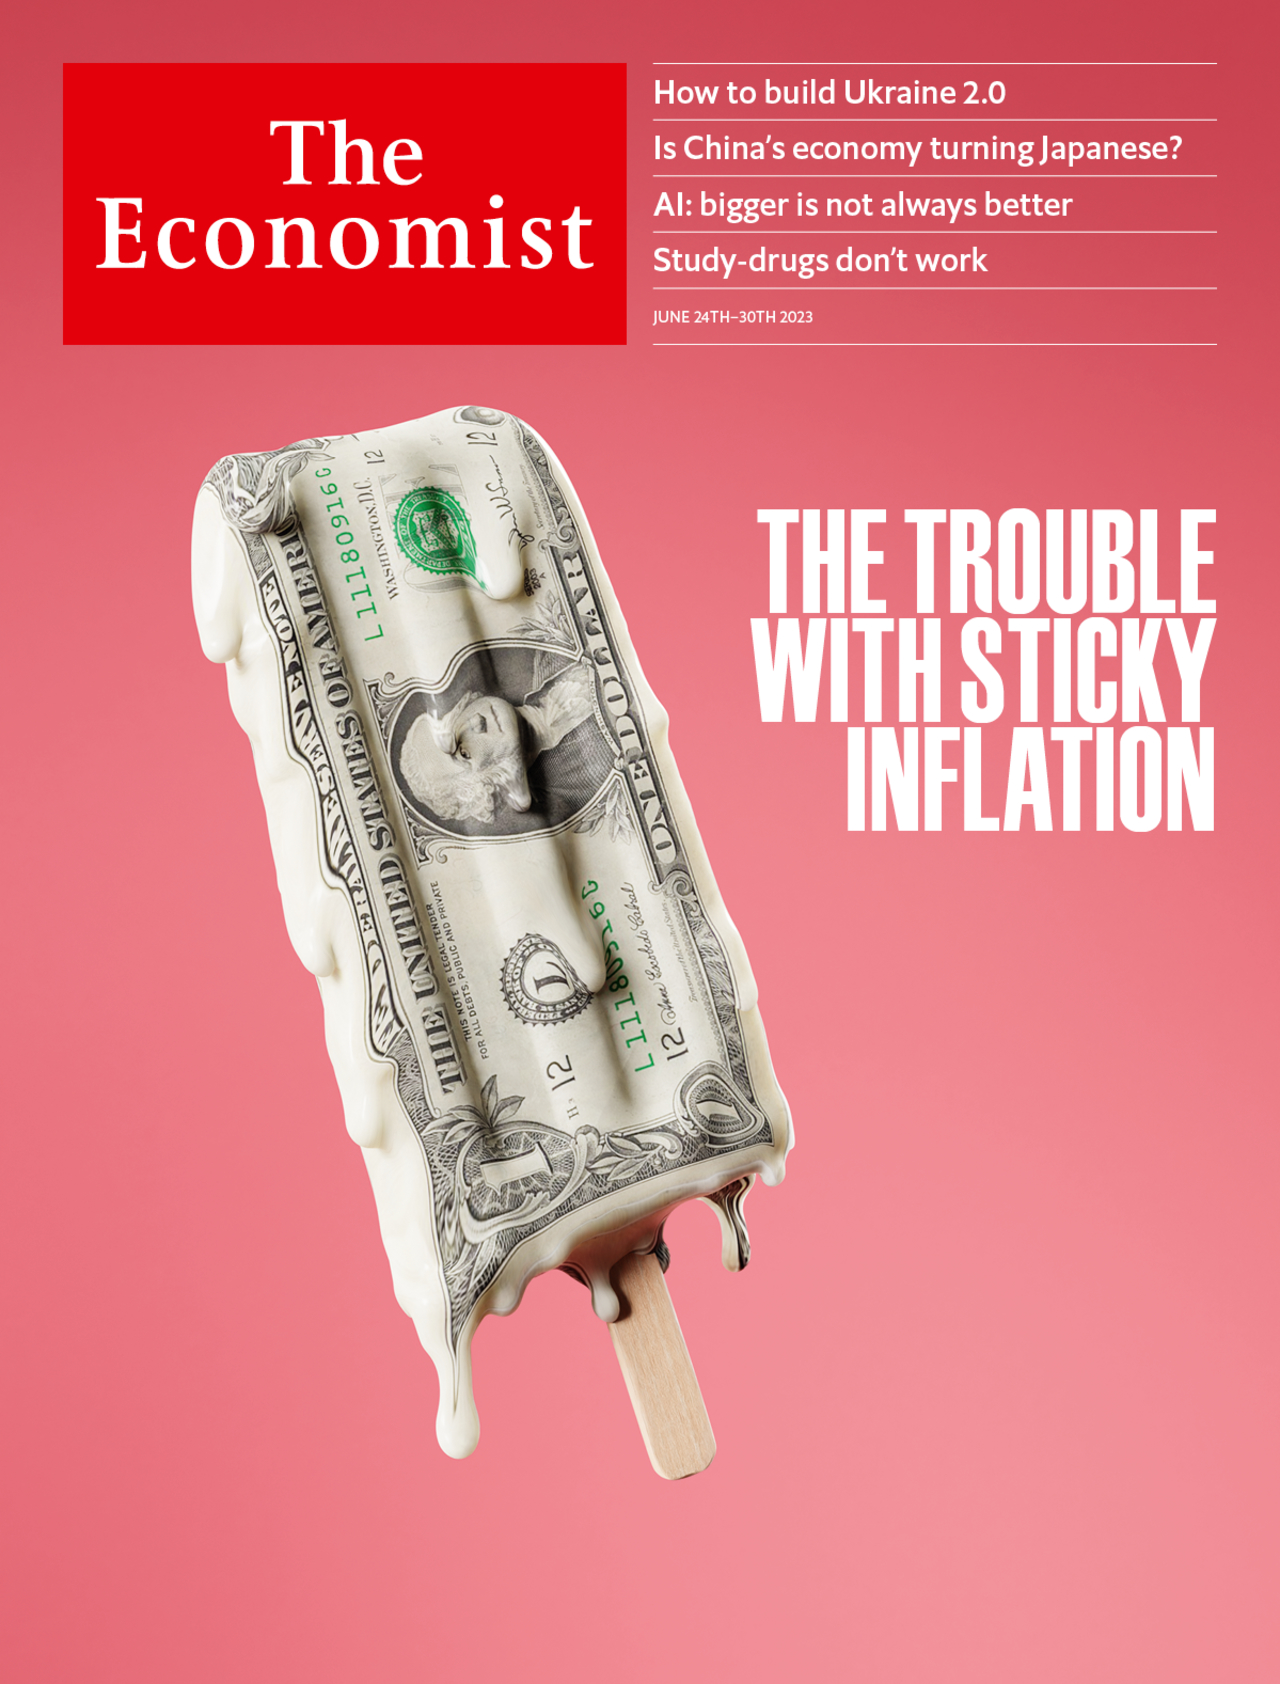 The trouble with sticky inflation